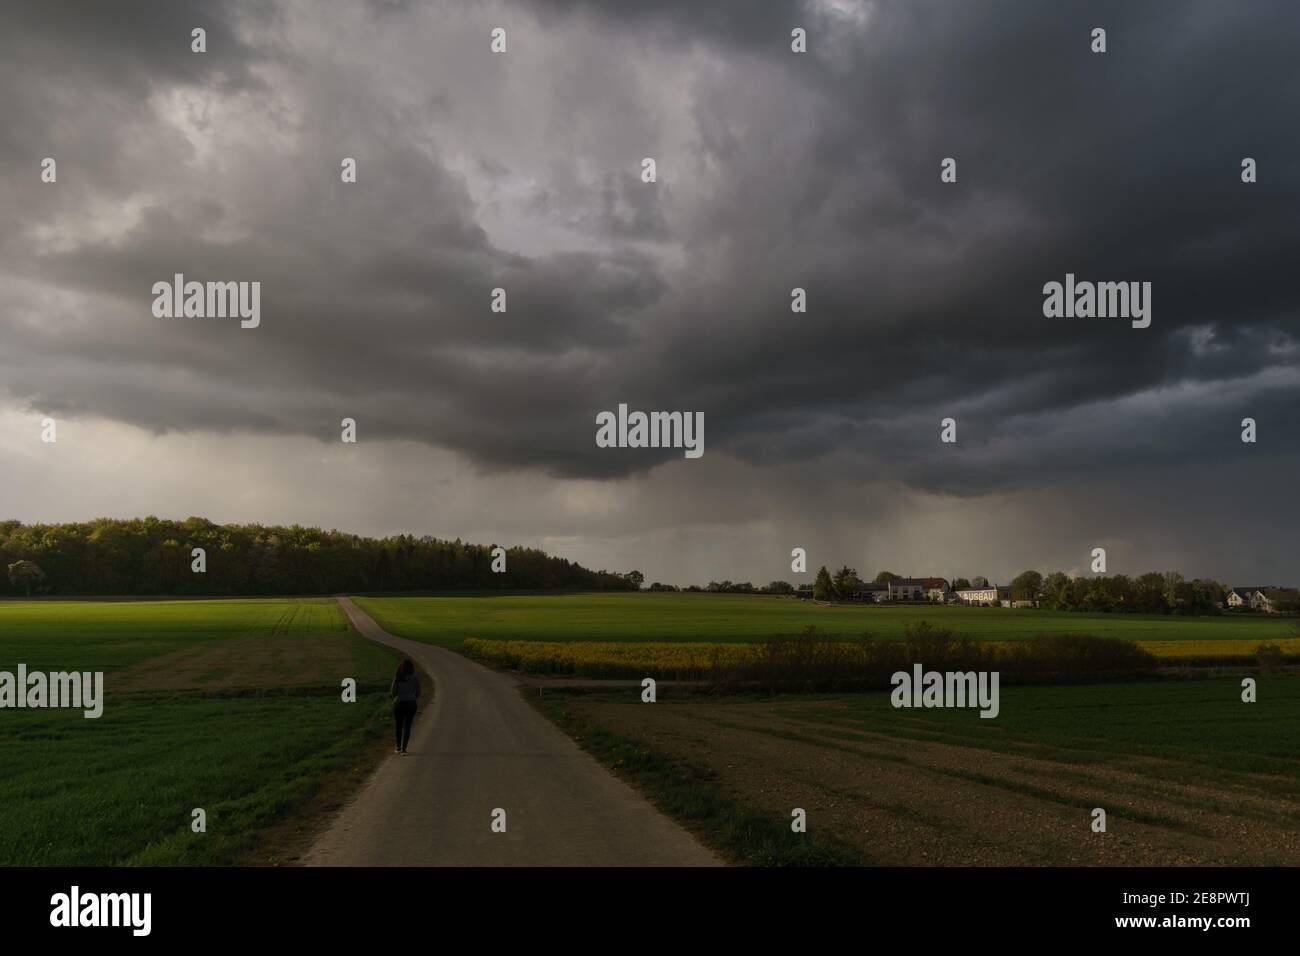 rural landscape at wild changing stormy weather condition with rain and sun Stock Photo